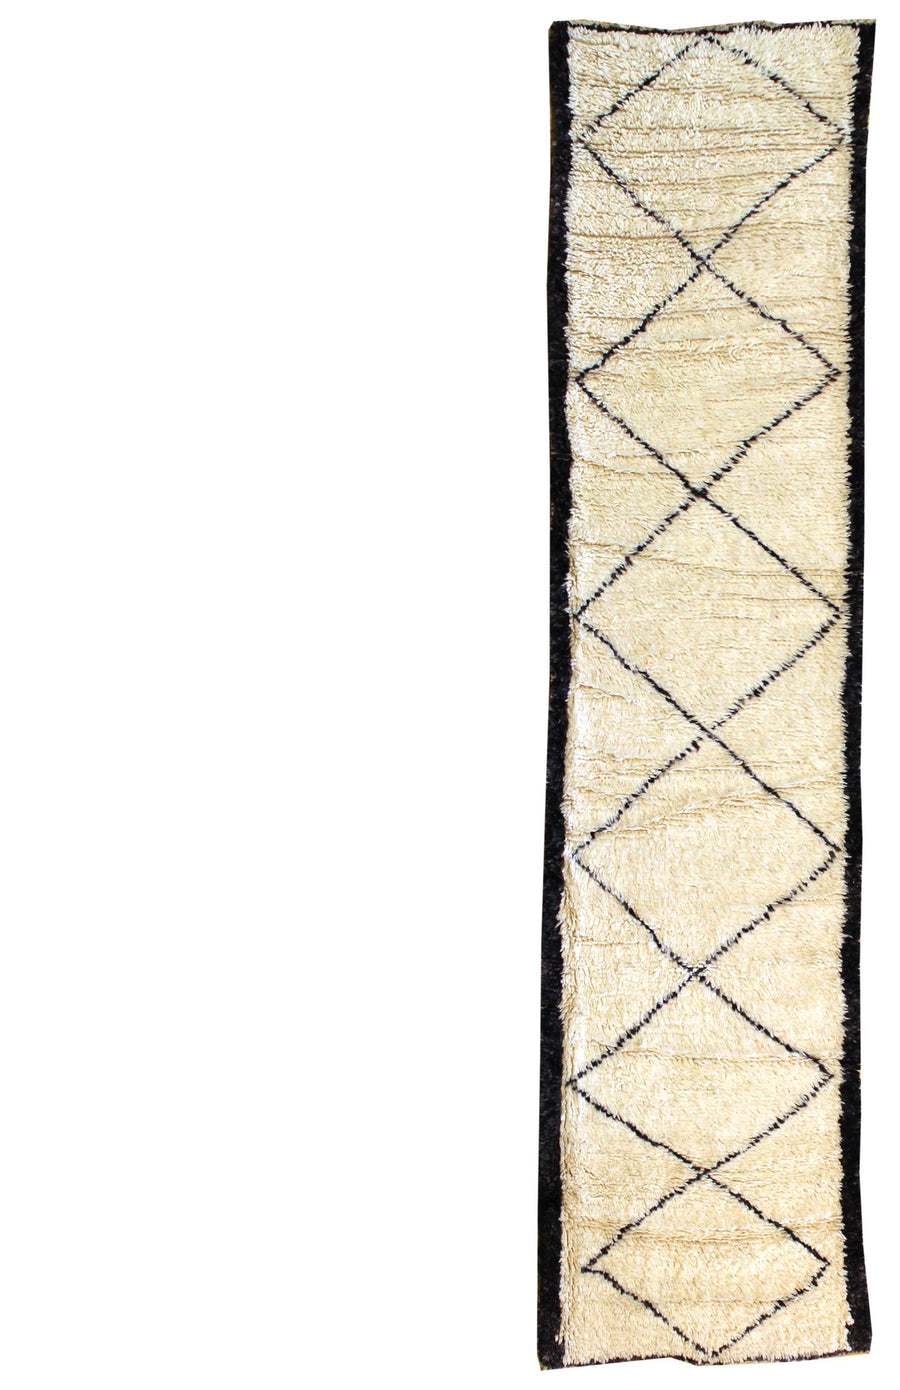 BENI OURAINE HANDKNOTTED RUG, J38917